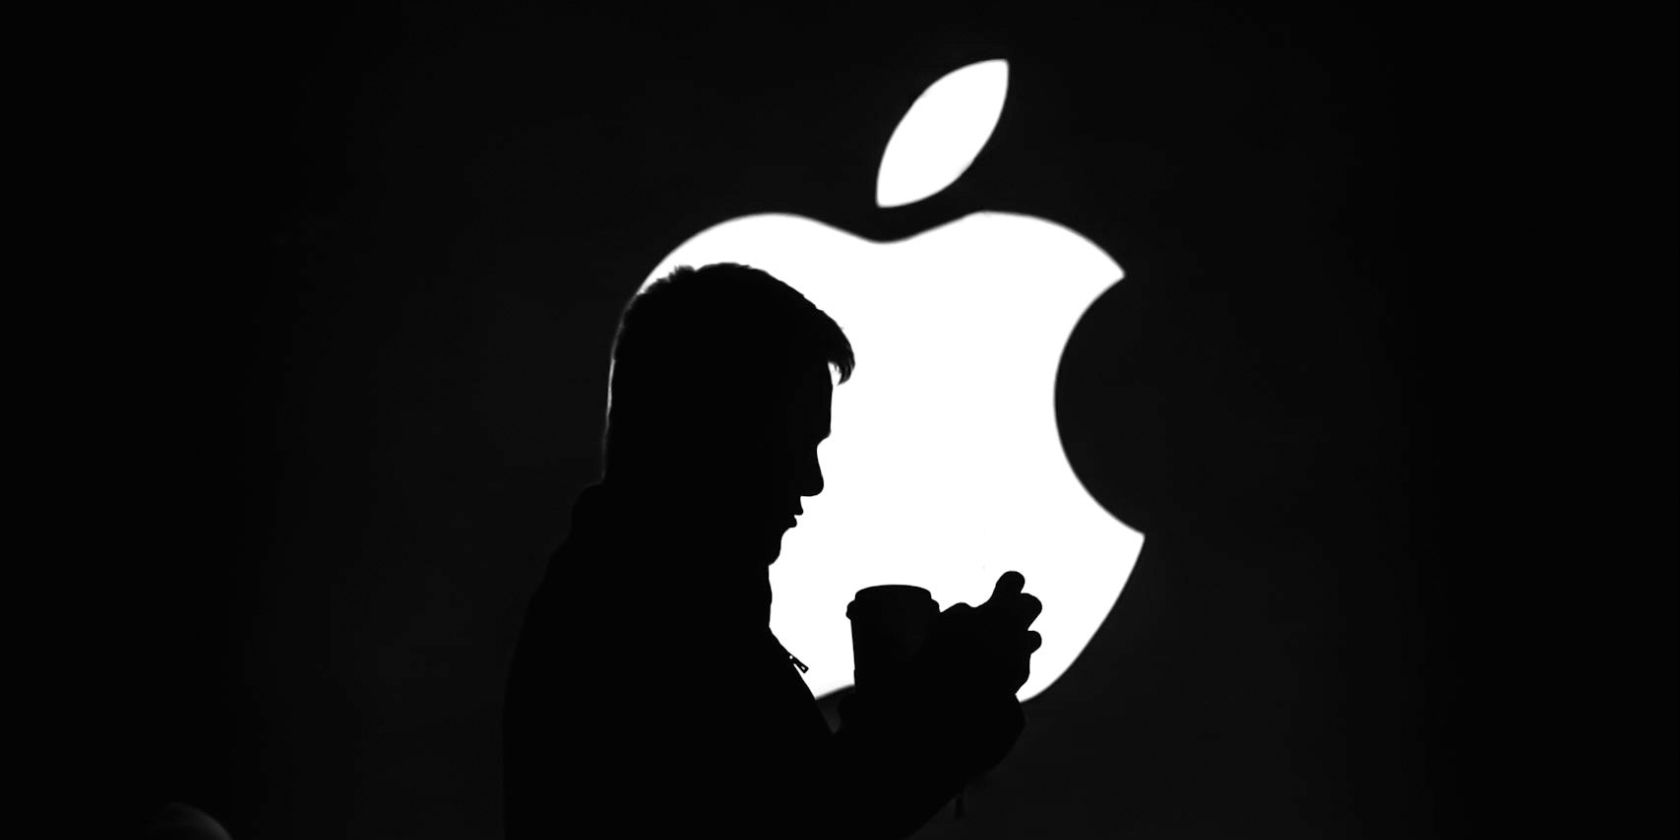 Shadow of a person standing in front of the Apple logo